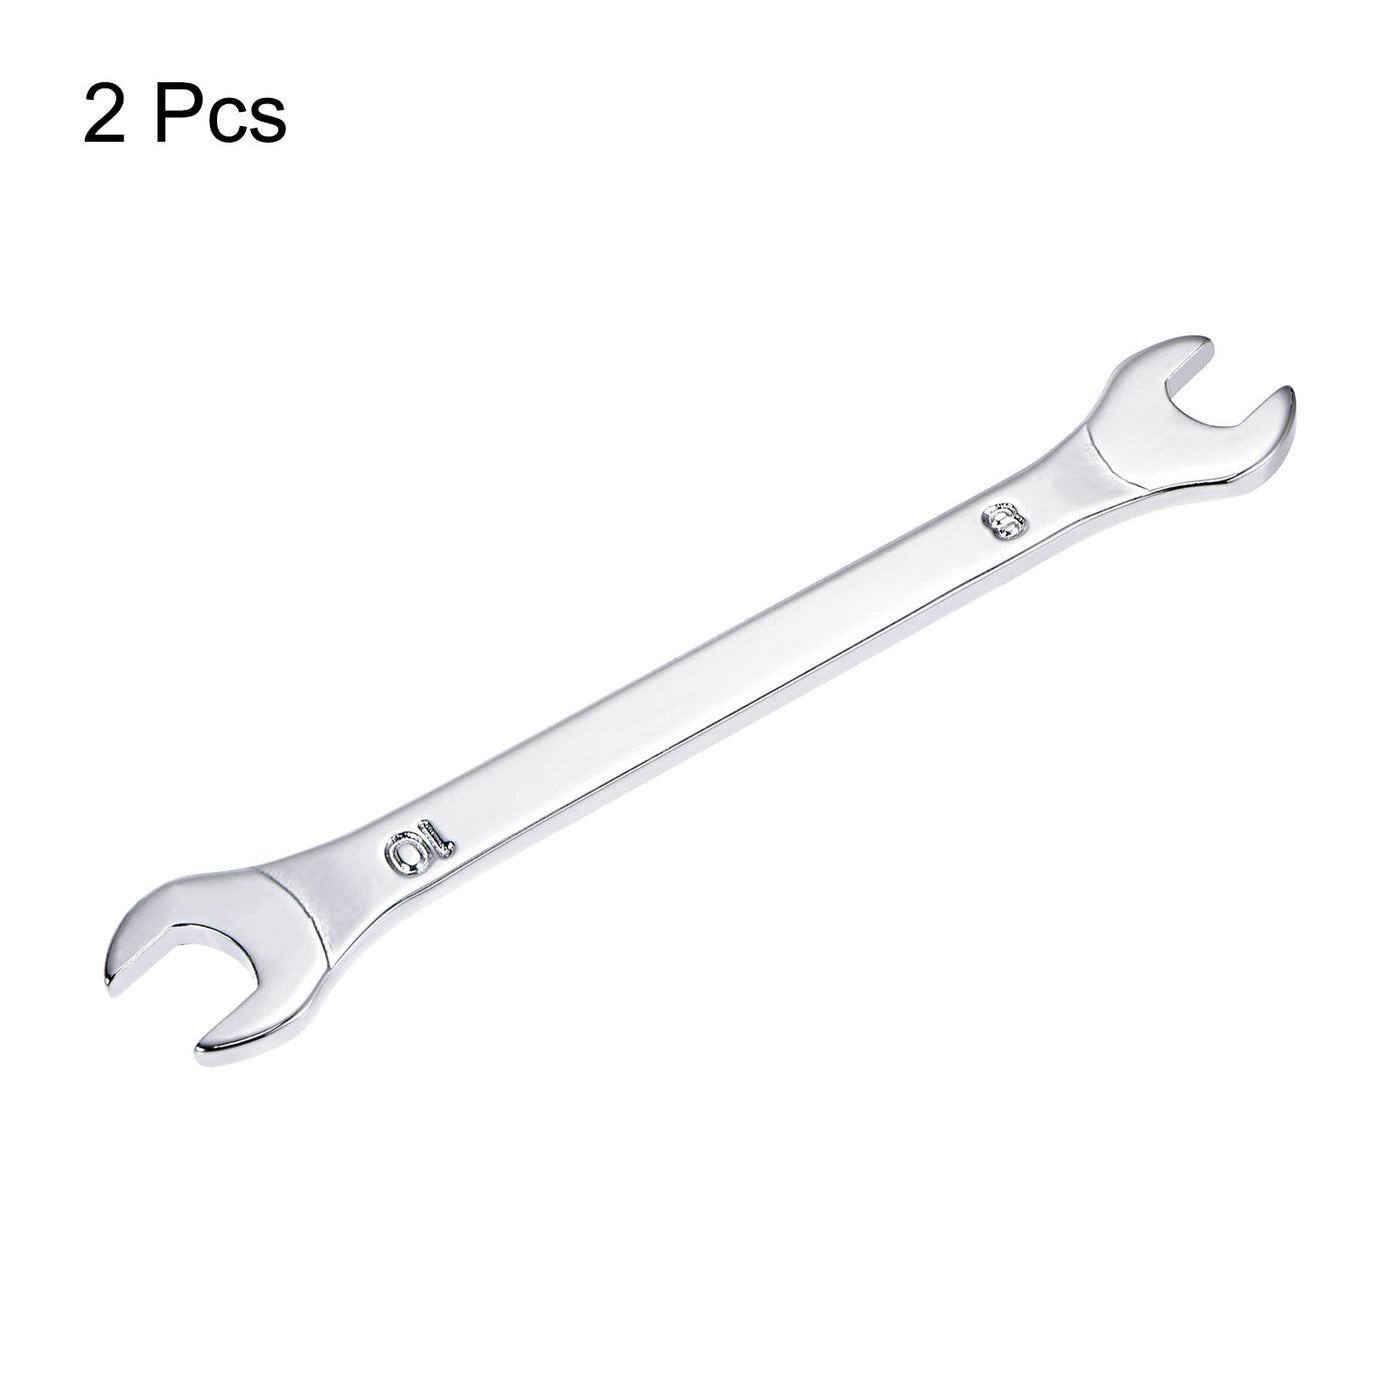 uxcell Uxcell Thin Open End Wrench Metric Chrome Plated High Carbon Steel